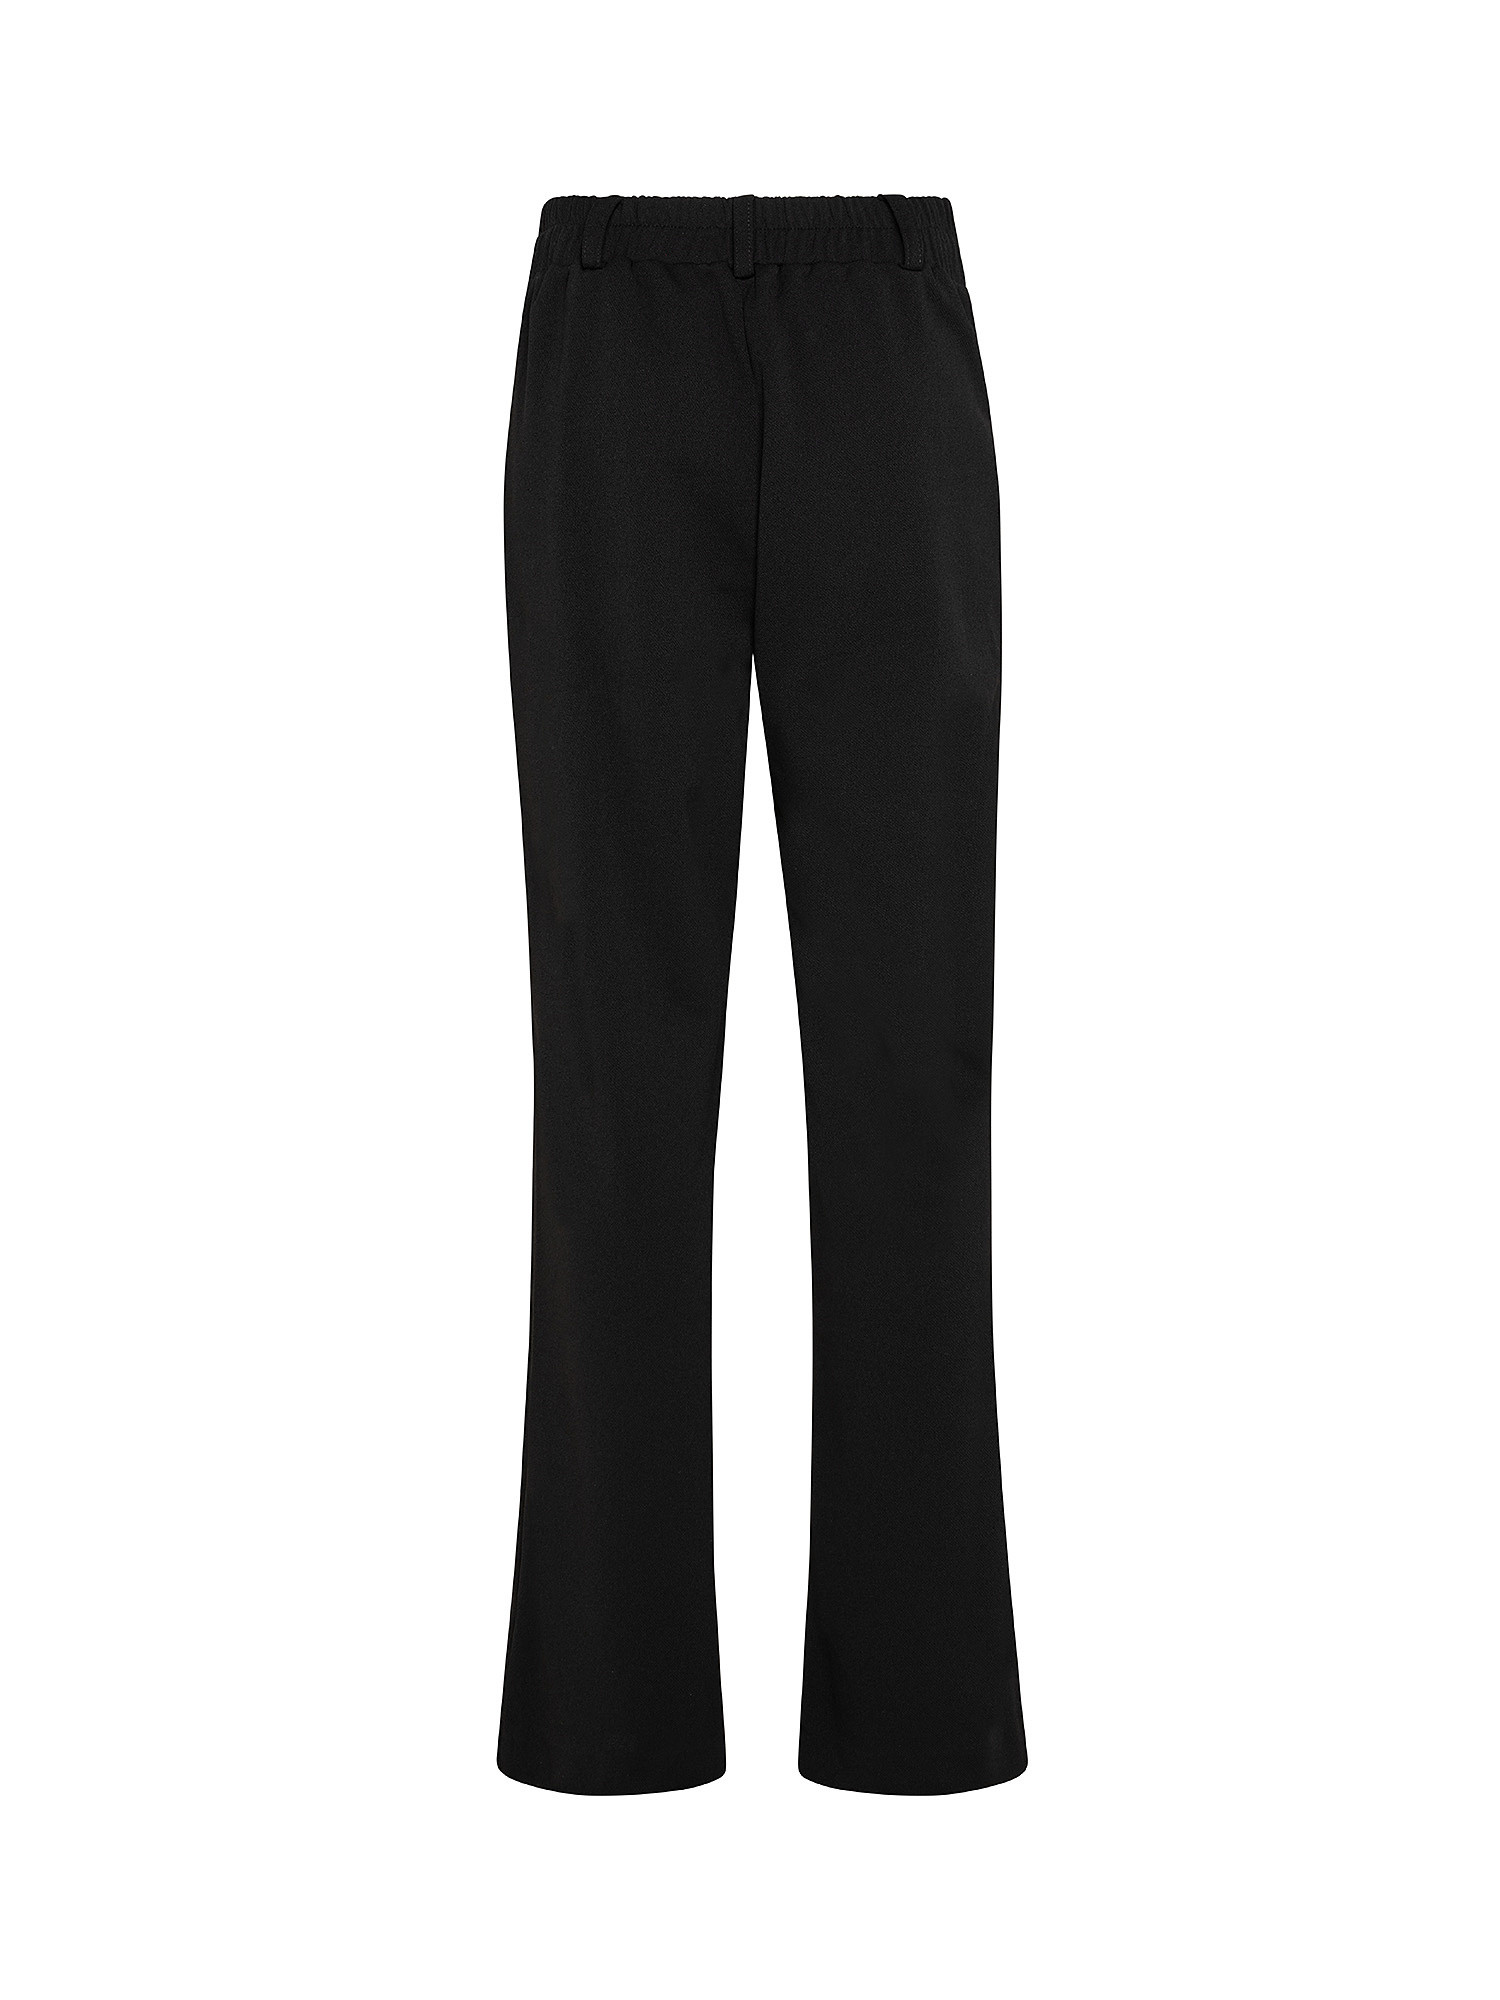 Trousers with elastic, Black, large image number 1